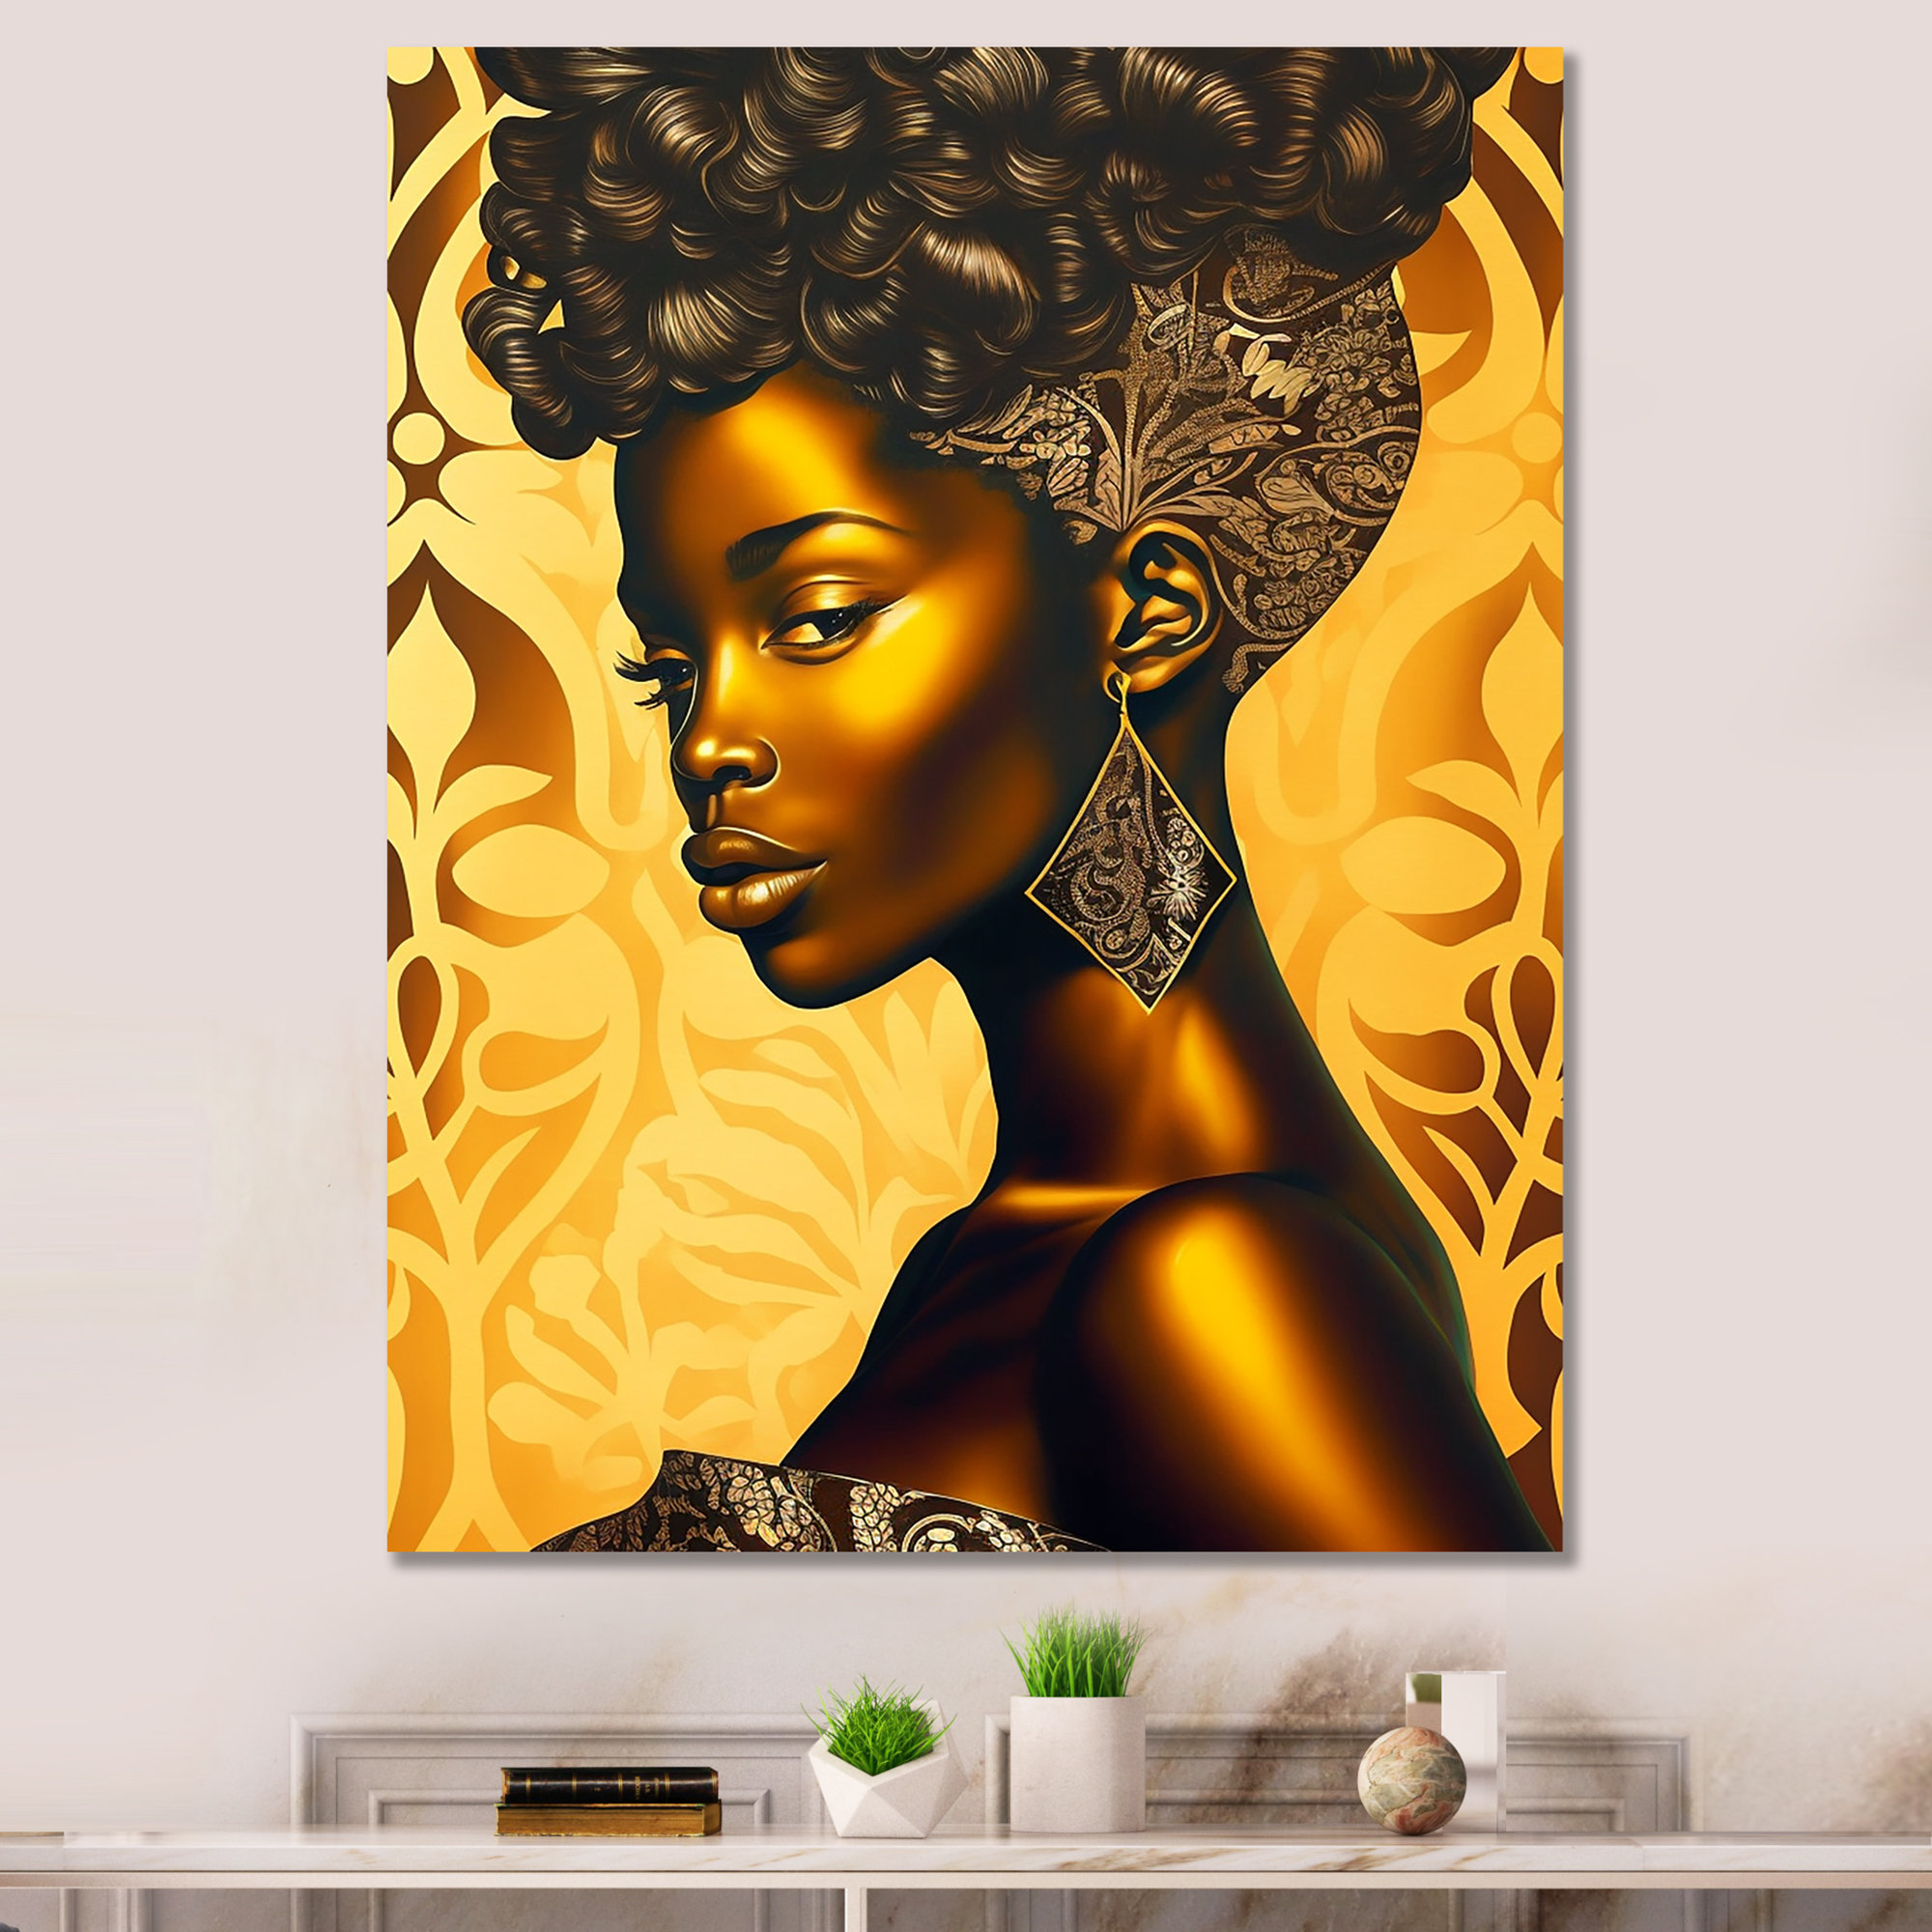 Black Art Afro Girl Magic Queen Bathroom Curtain - Home Decor Shower  Curtains, Tapestry and More at